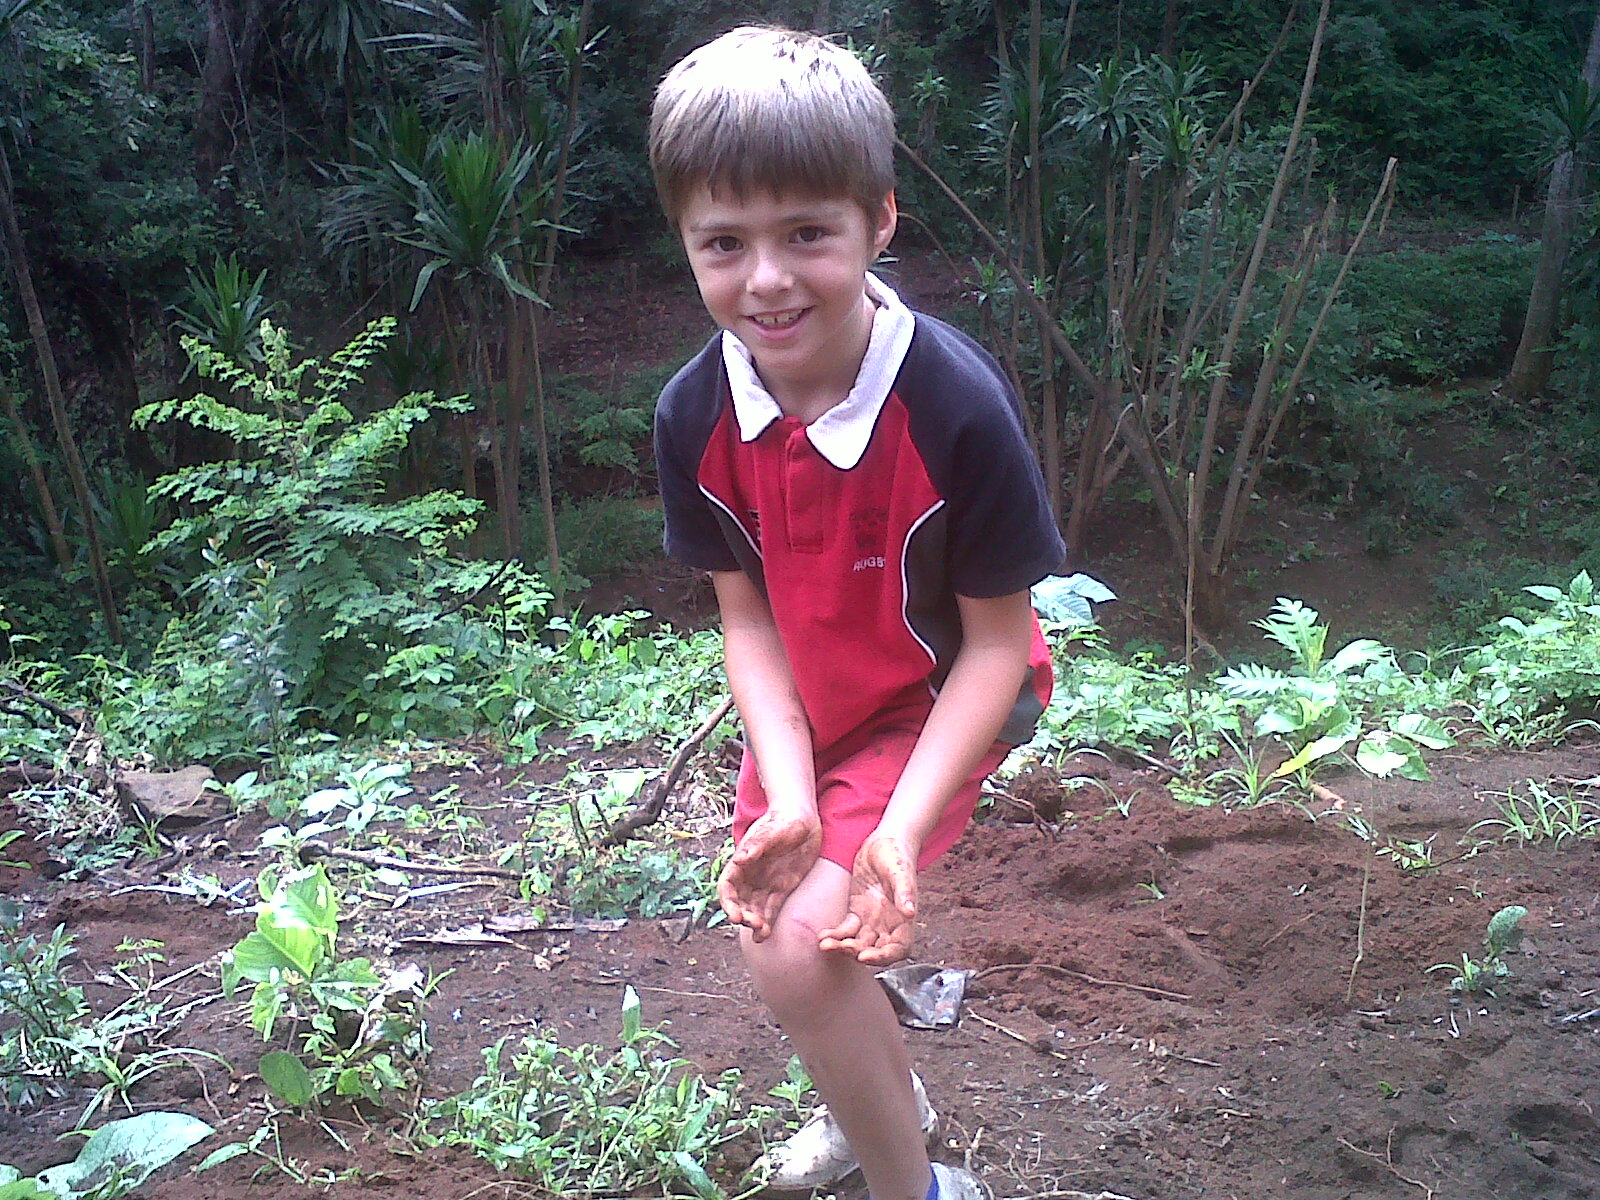 Our hummingbird, Leo, from Peponi Prep School!